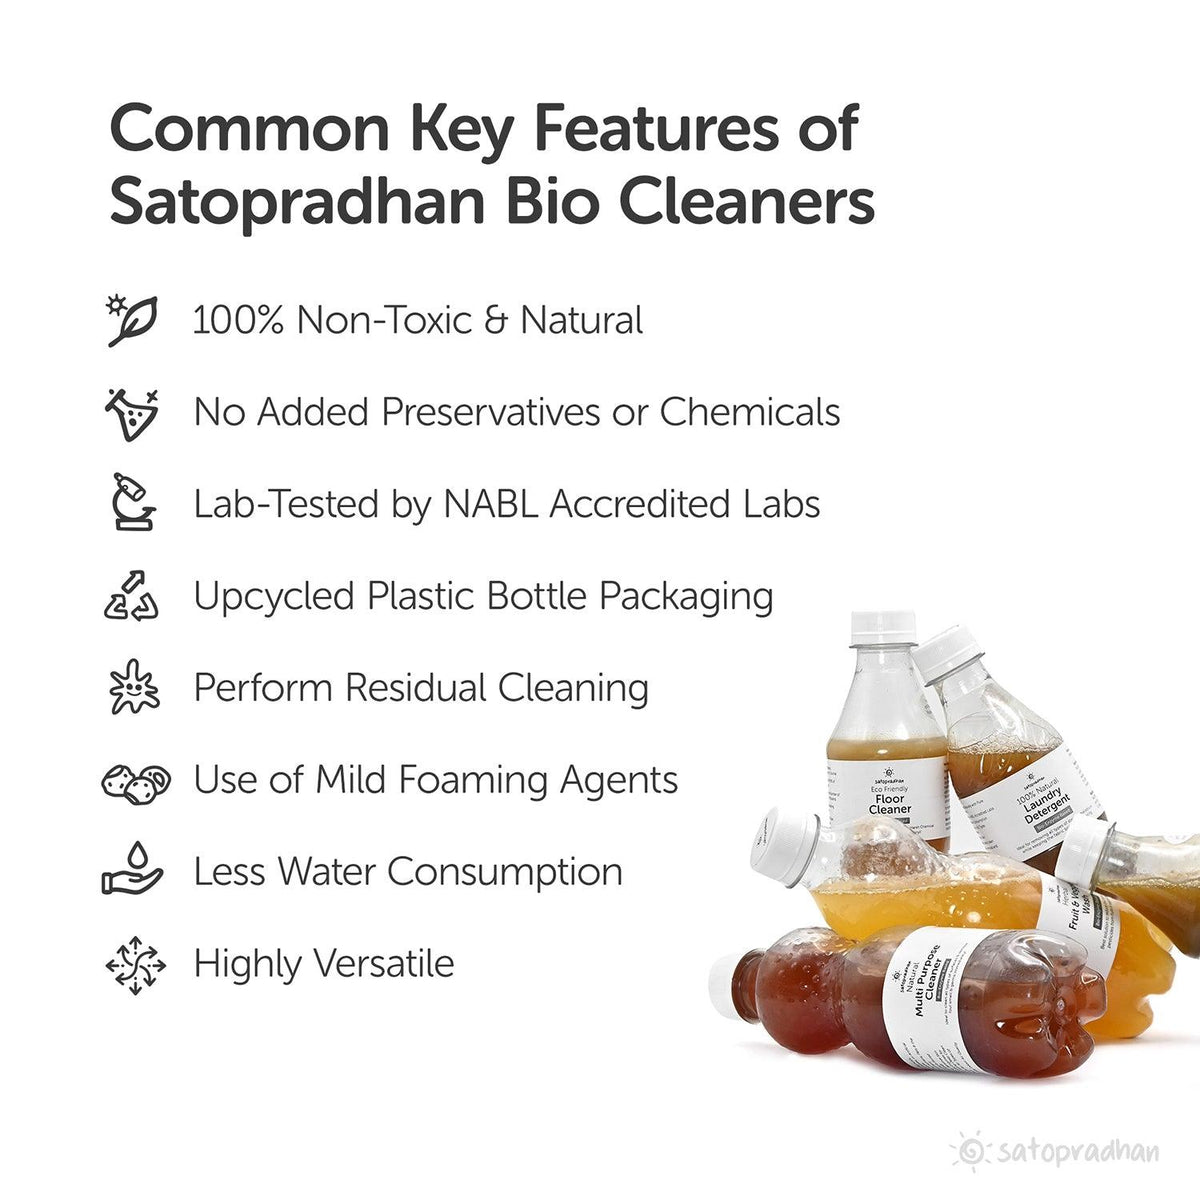 Eco Home Cleaners Trial Pack - 6 Bio Enzyme Based Natural Cleaners Free of Harmful Chemicals in Upcycled Plastic Bottles of 300ml - Satopradhan